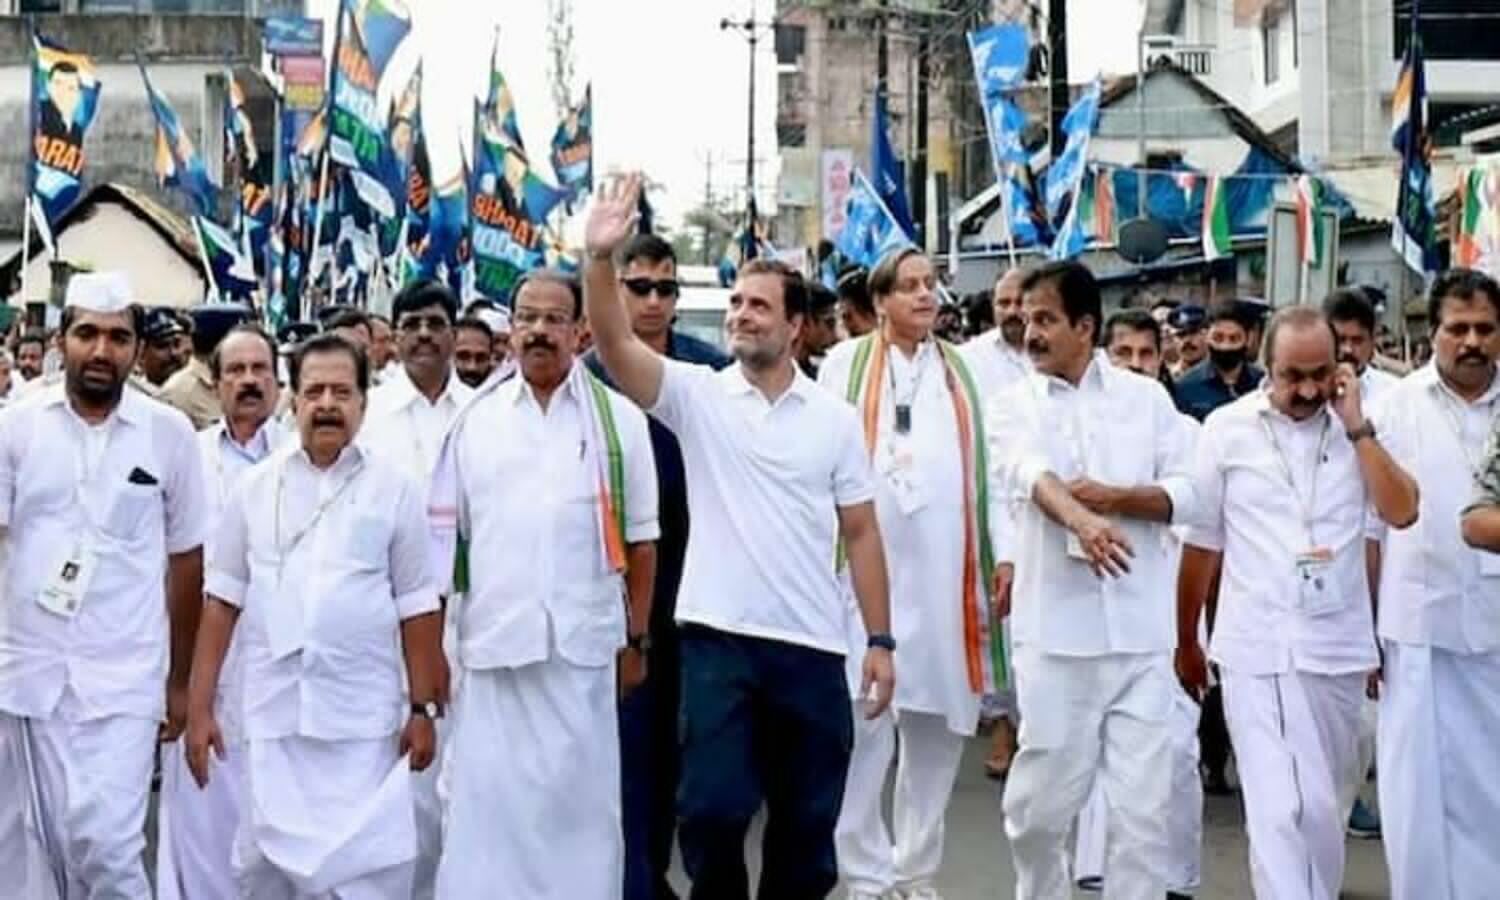 Bharat Jodo Yatra: Congress’s Bharat Jodo Yatra reaches Kerala, will take out padyatra in different districts for 19 days